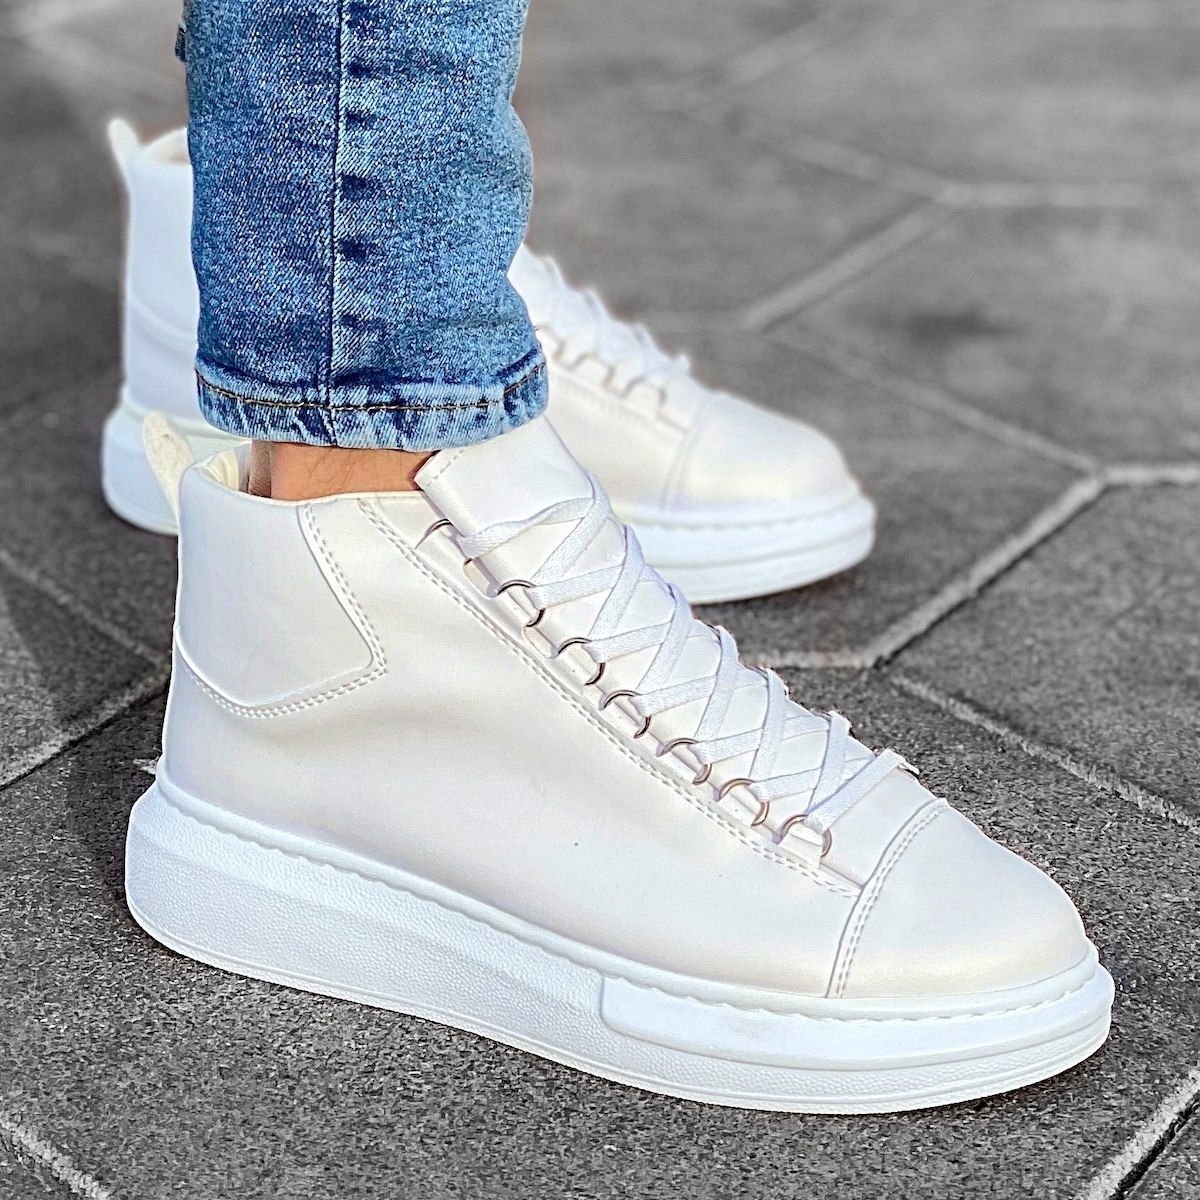 Hype Sole Mox High Top Sneakers in White - 1